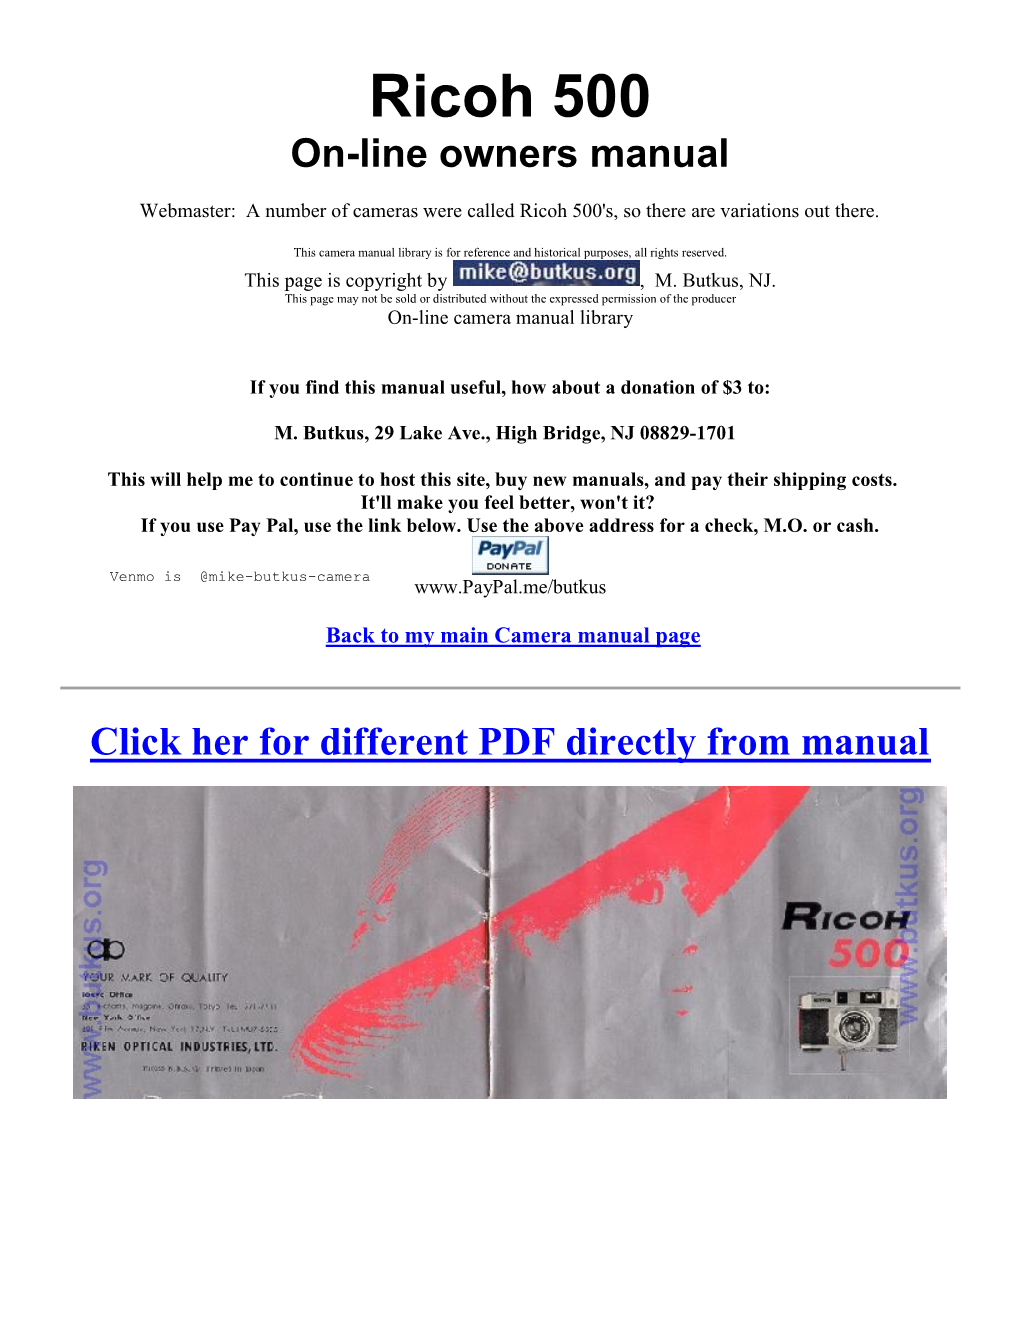 Ricoh 500 On-Line Owners Manual